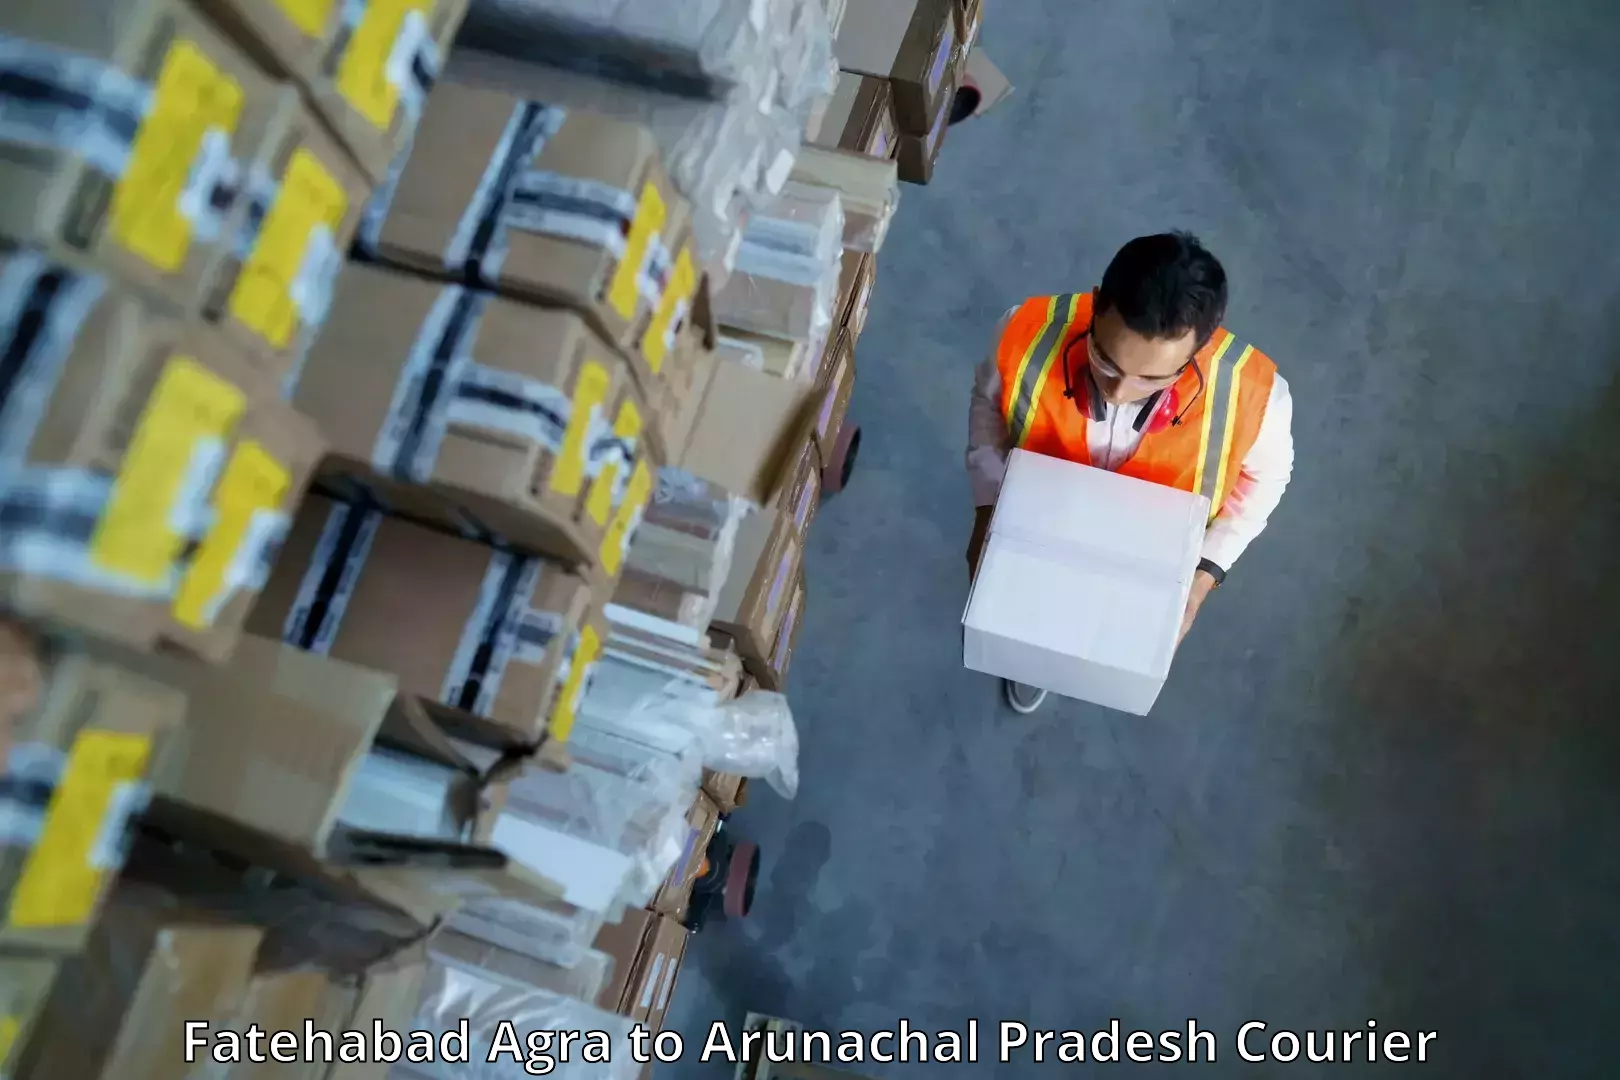 Courier dispatch services Fatehabad Agra to Boleng